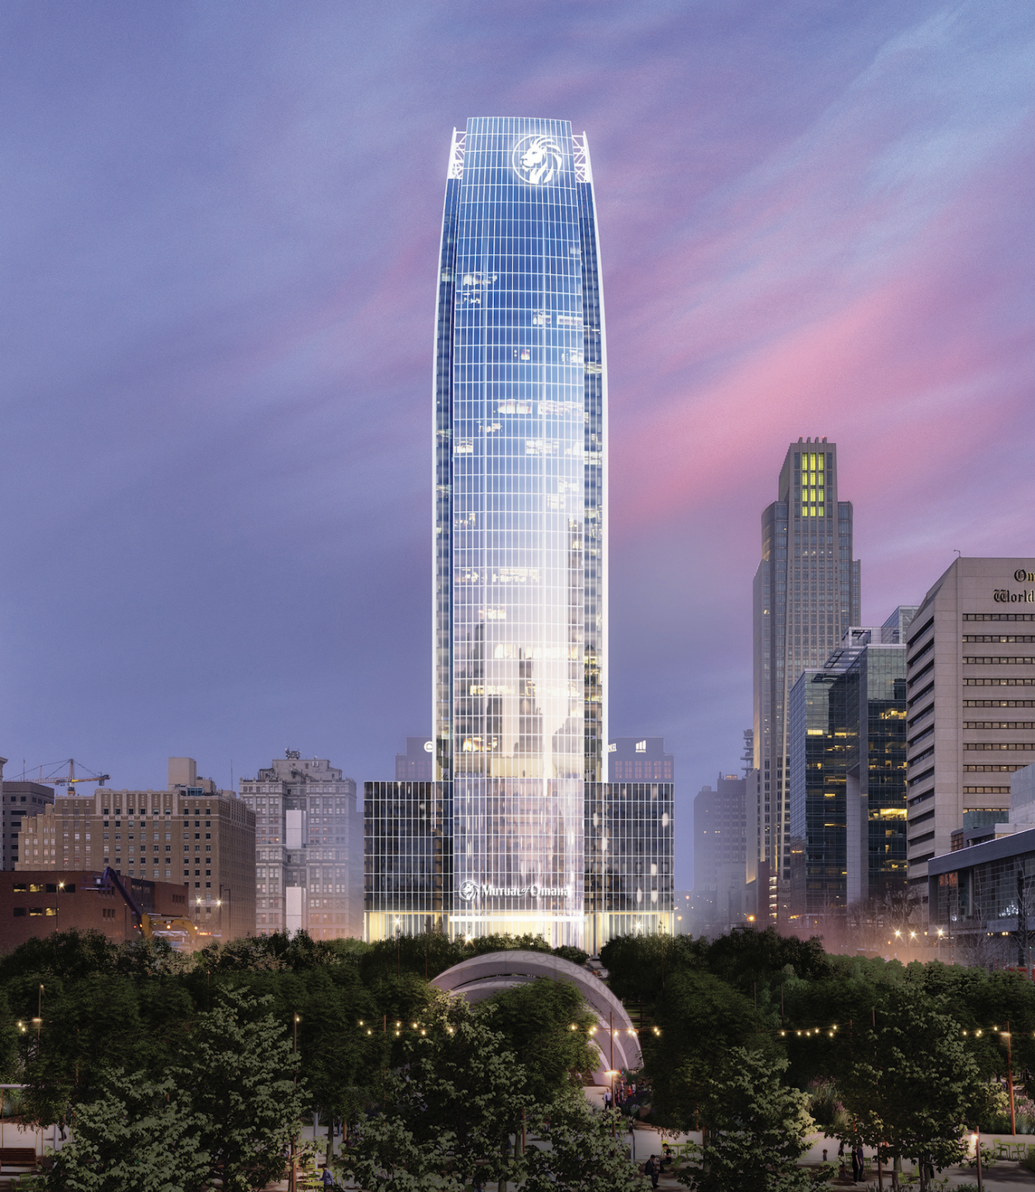 Will Mutual of Omaha's new tower be the city's tallest? It's too soon